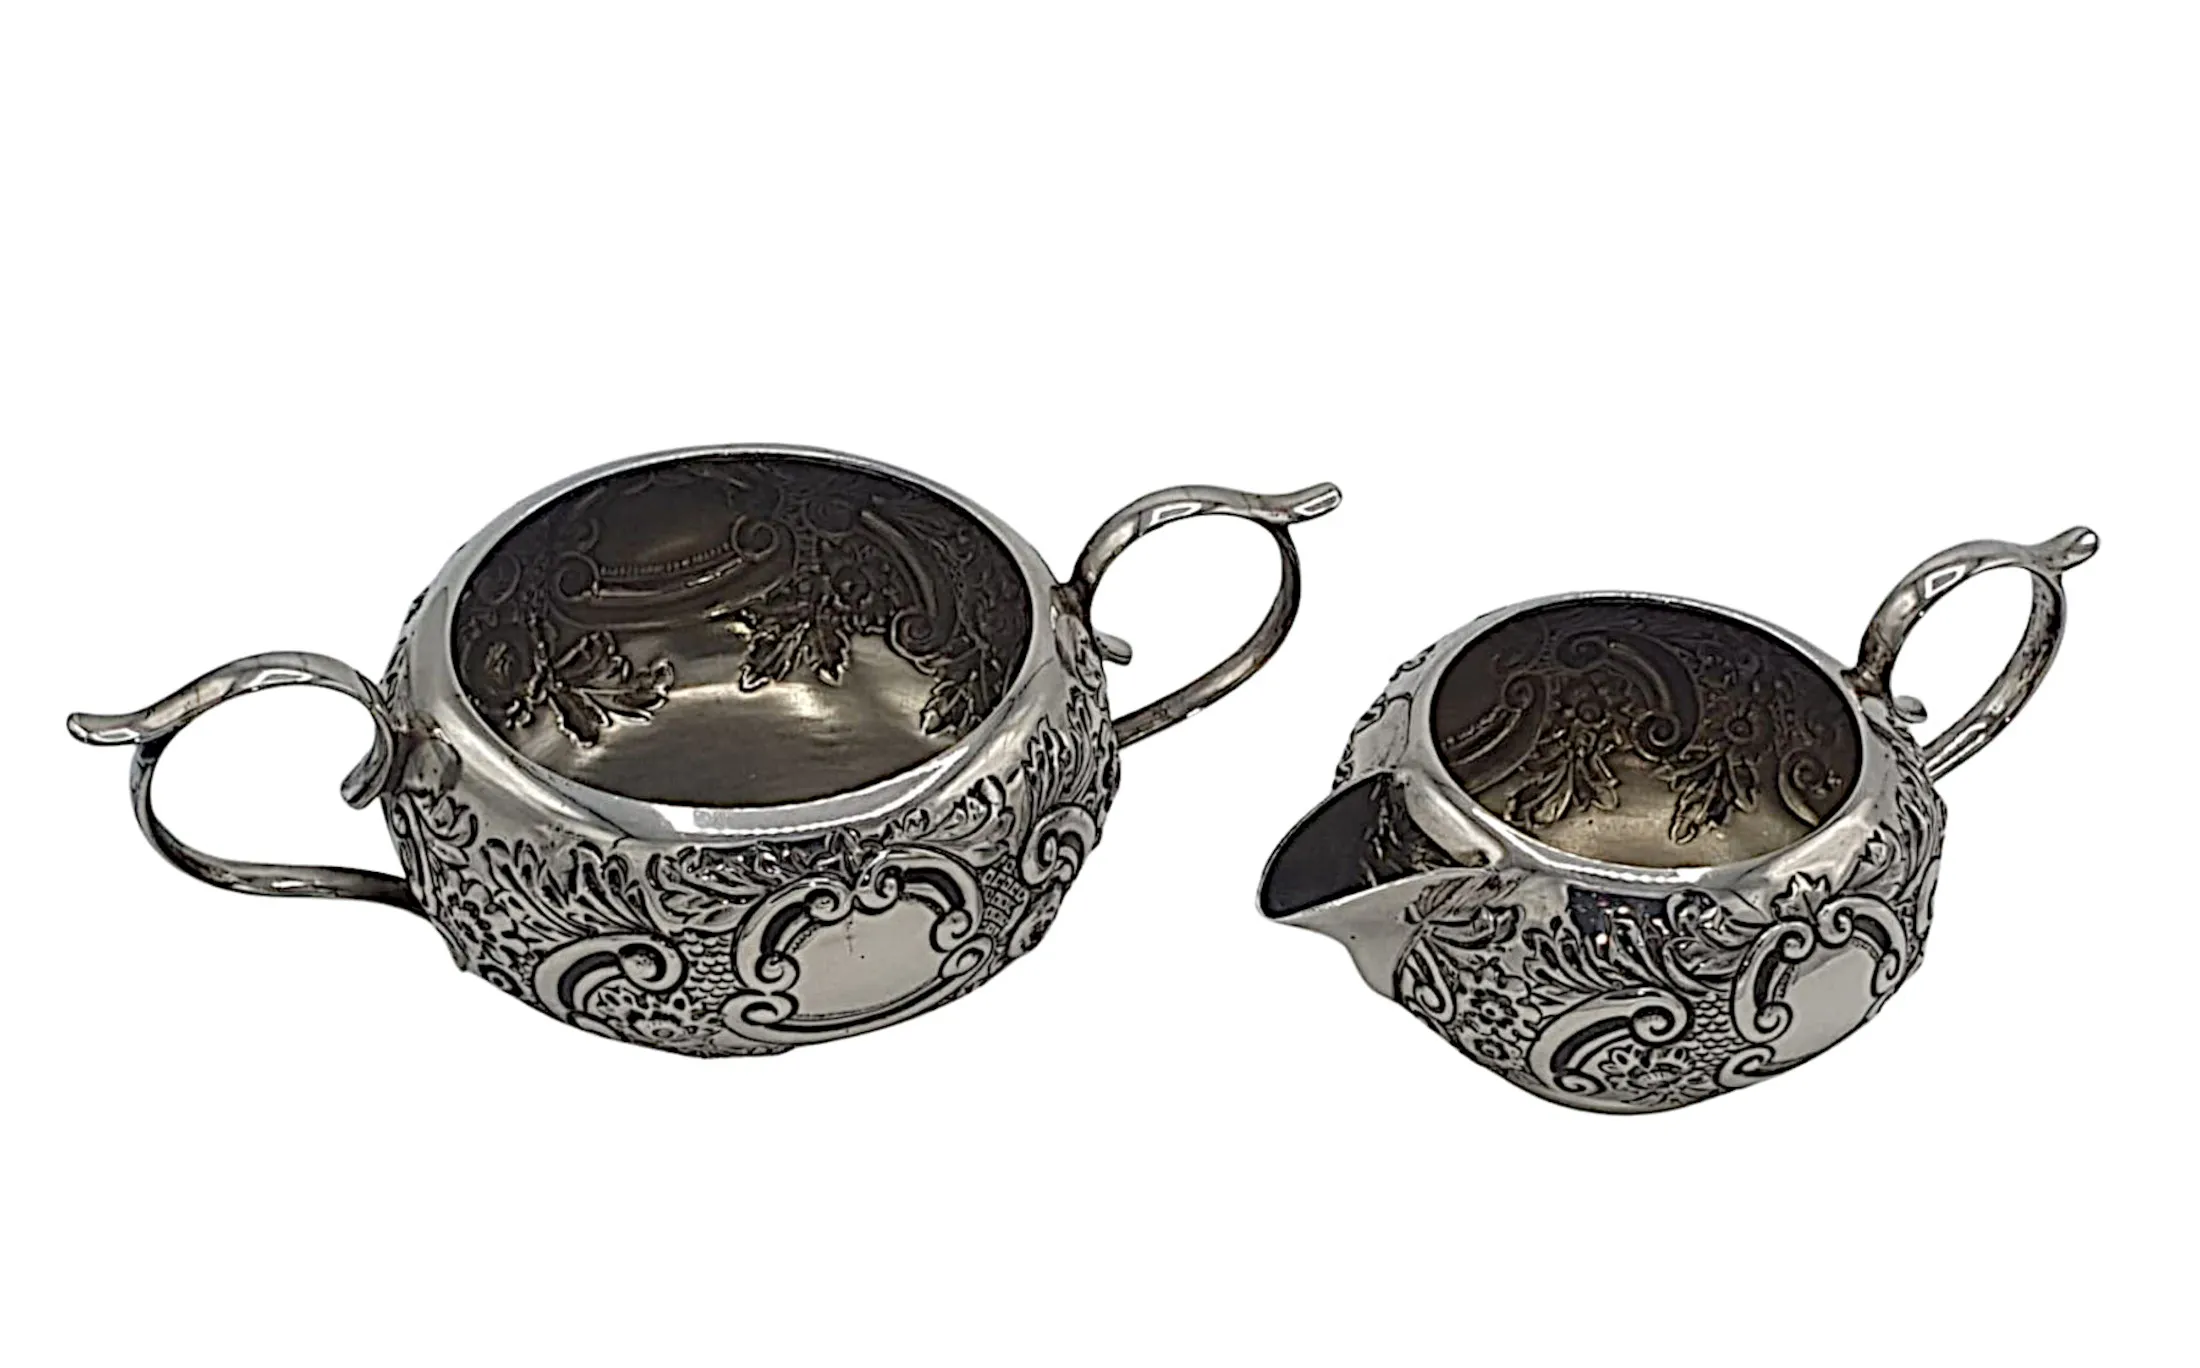 A Beautiful Early 20th Century Sterling Silver Set of Creamer and Sugar Bowl